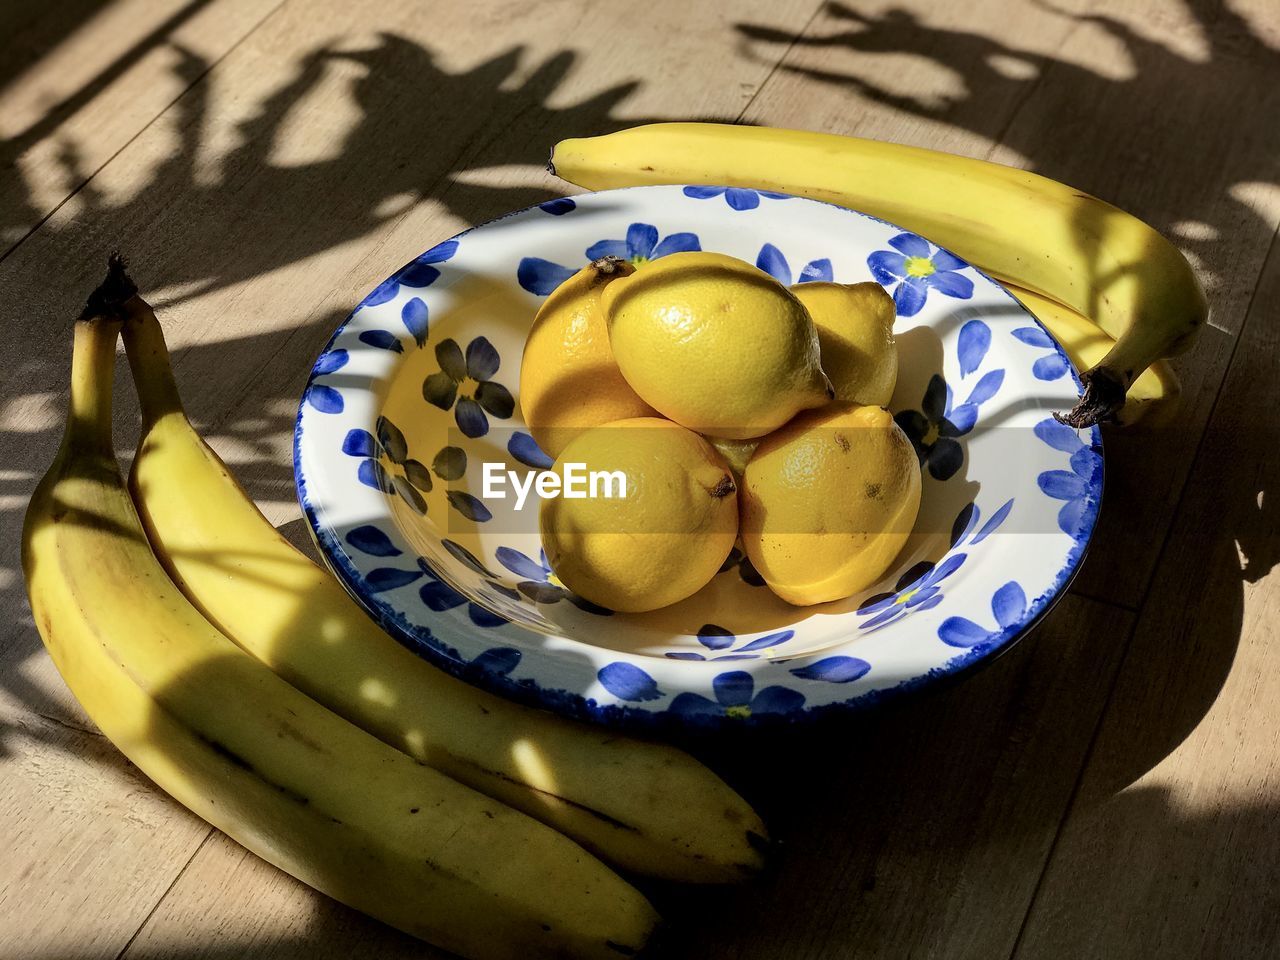 Lemons in blue flower patterned bowl surrounded by bananas on wooden table with sunlight , shadows.